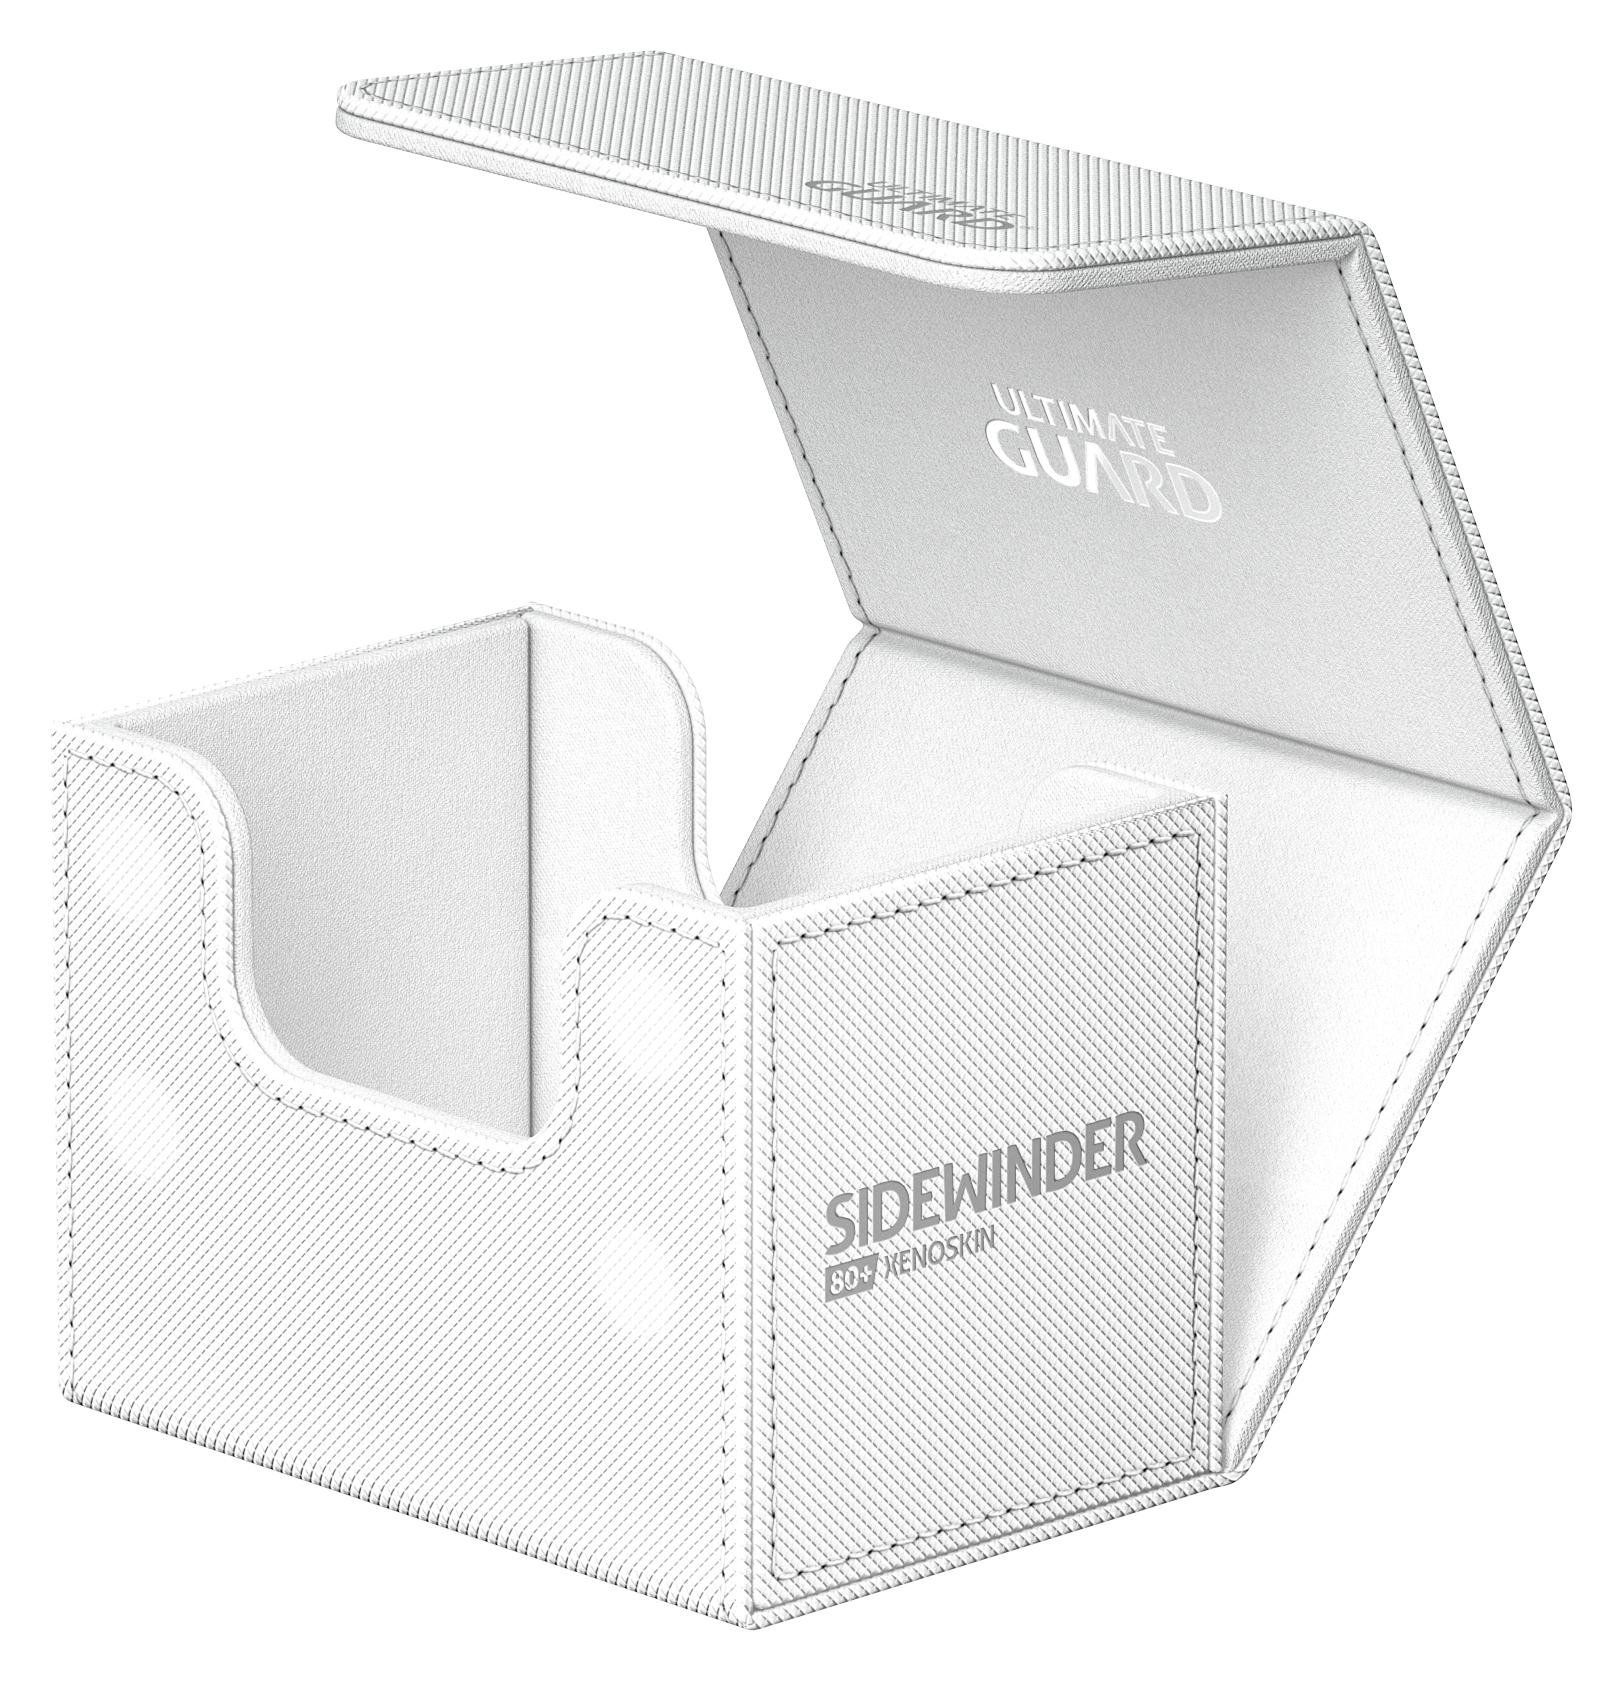 Ultimate Guard Card Deck Box Sidewinder 80+ White Weiss